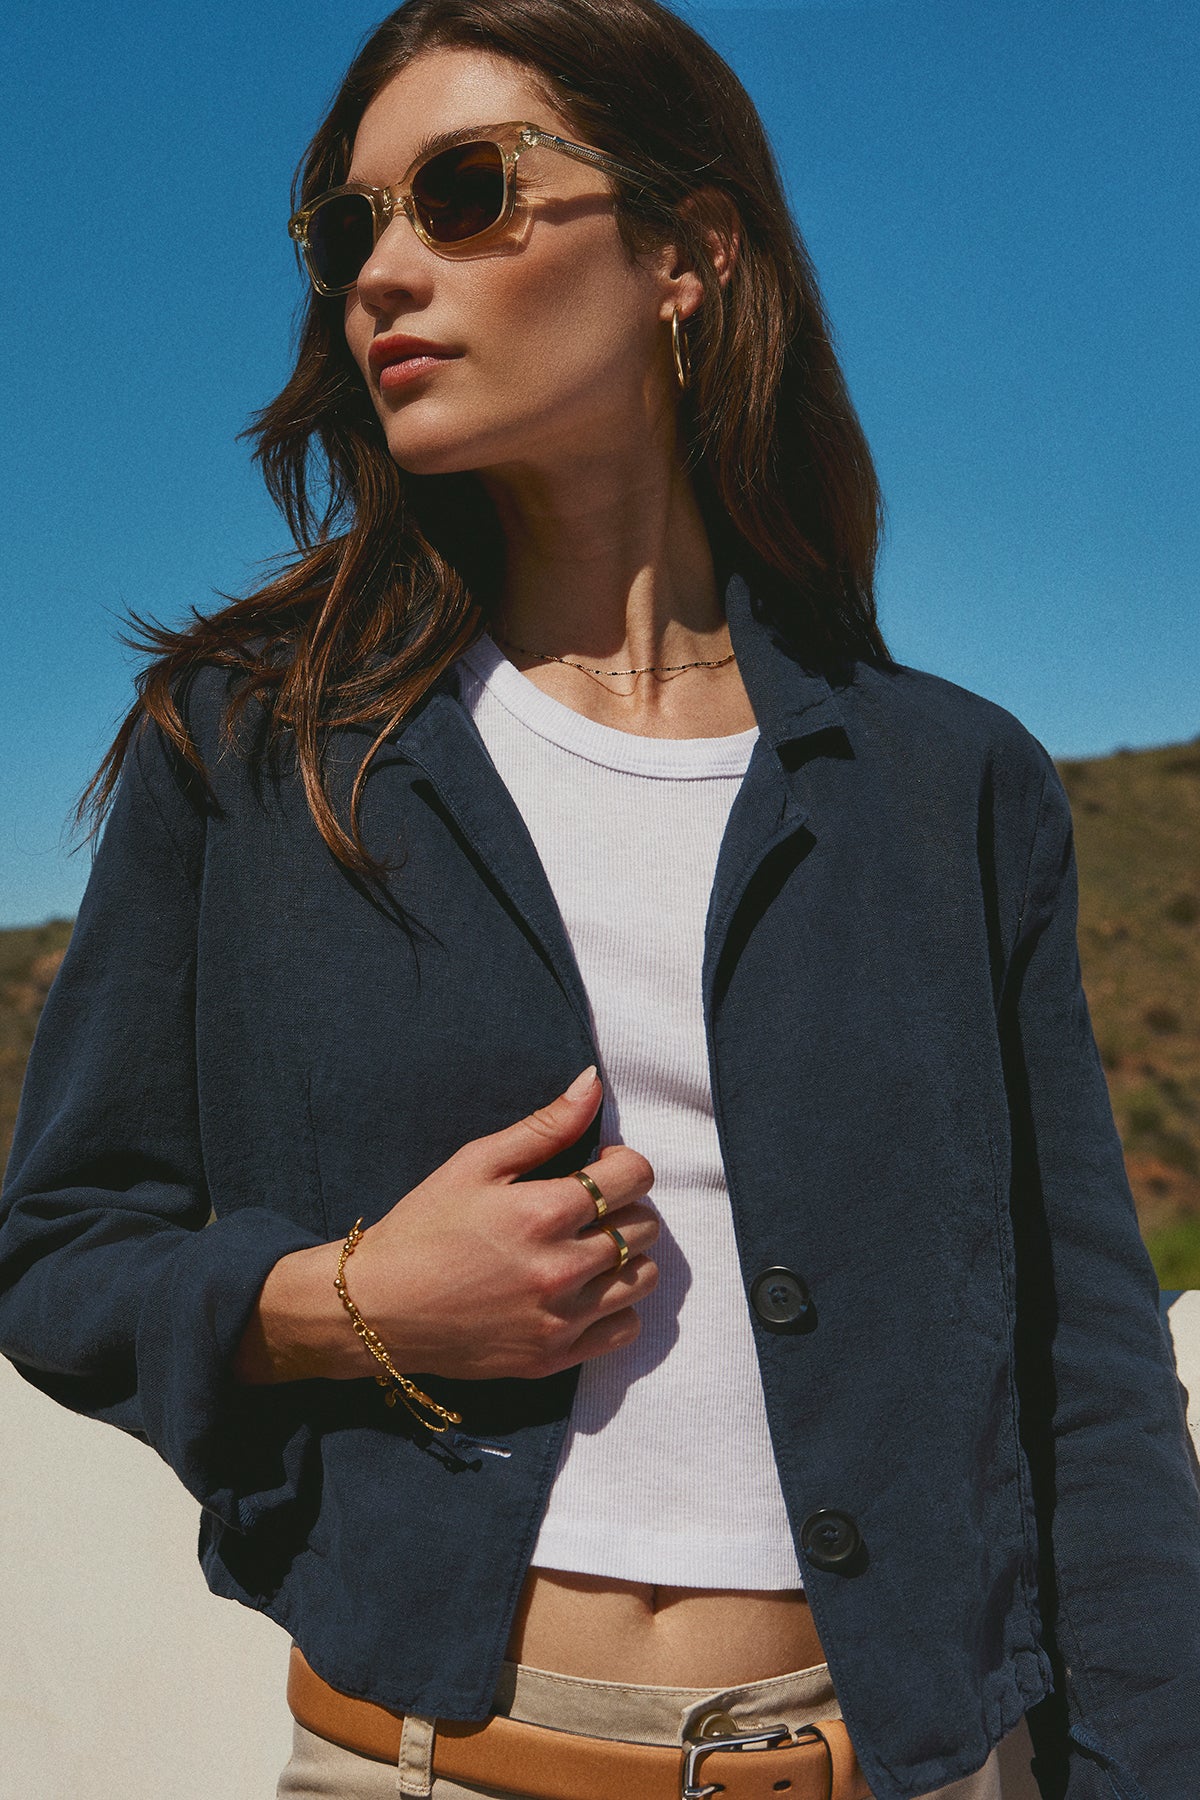 A woman wearing sunglasses, a Navy Notched Collar Blazer by Velvet by Graham & Spencer, and a white top stands outdoors with a clear blue sky in the background.-36783618752705